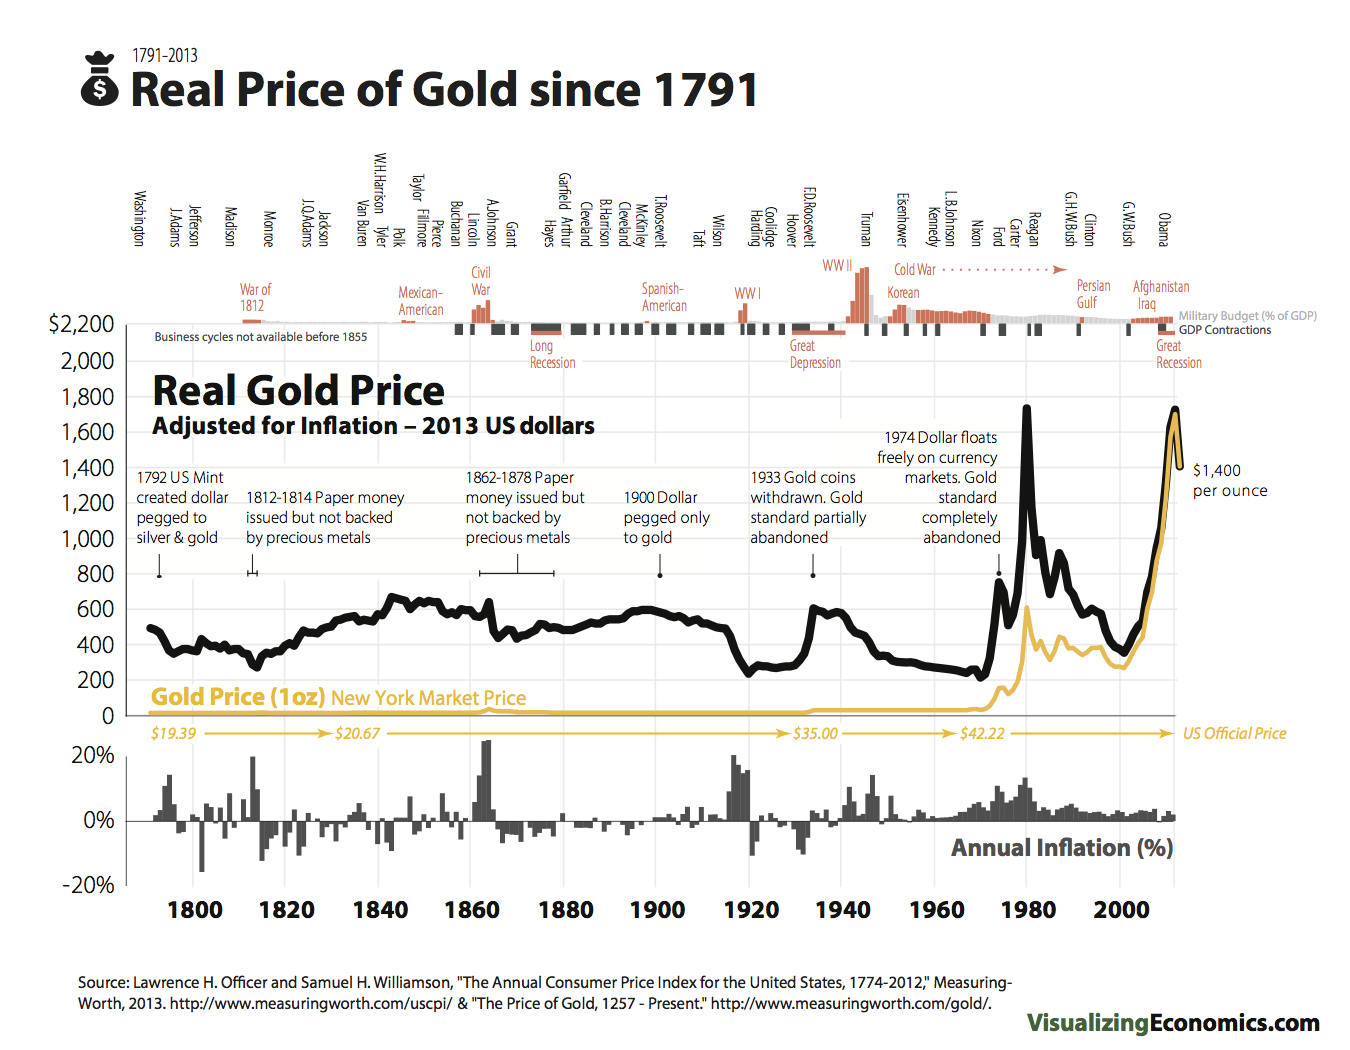 Analyzing the 50-year history of gold prices